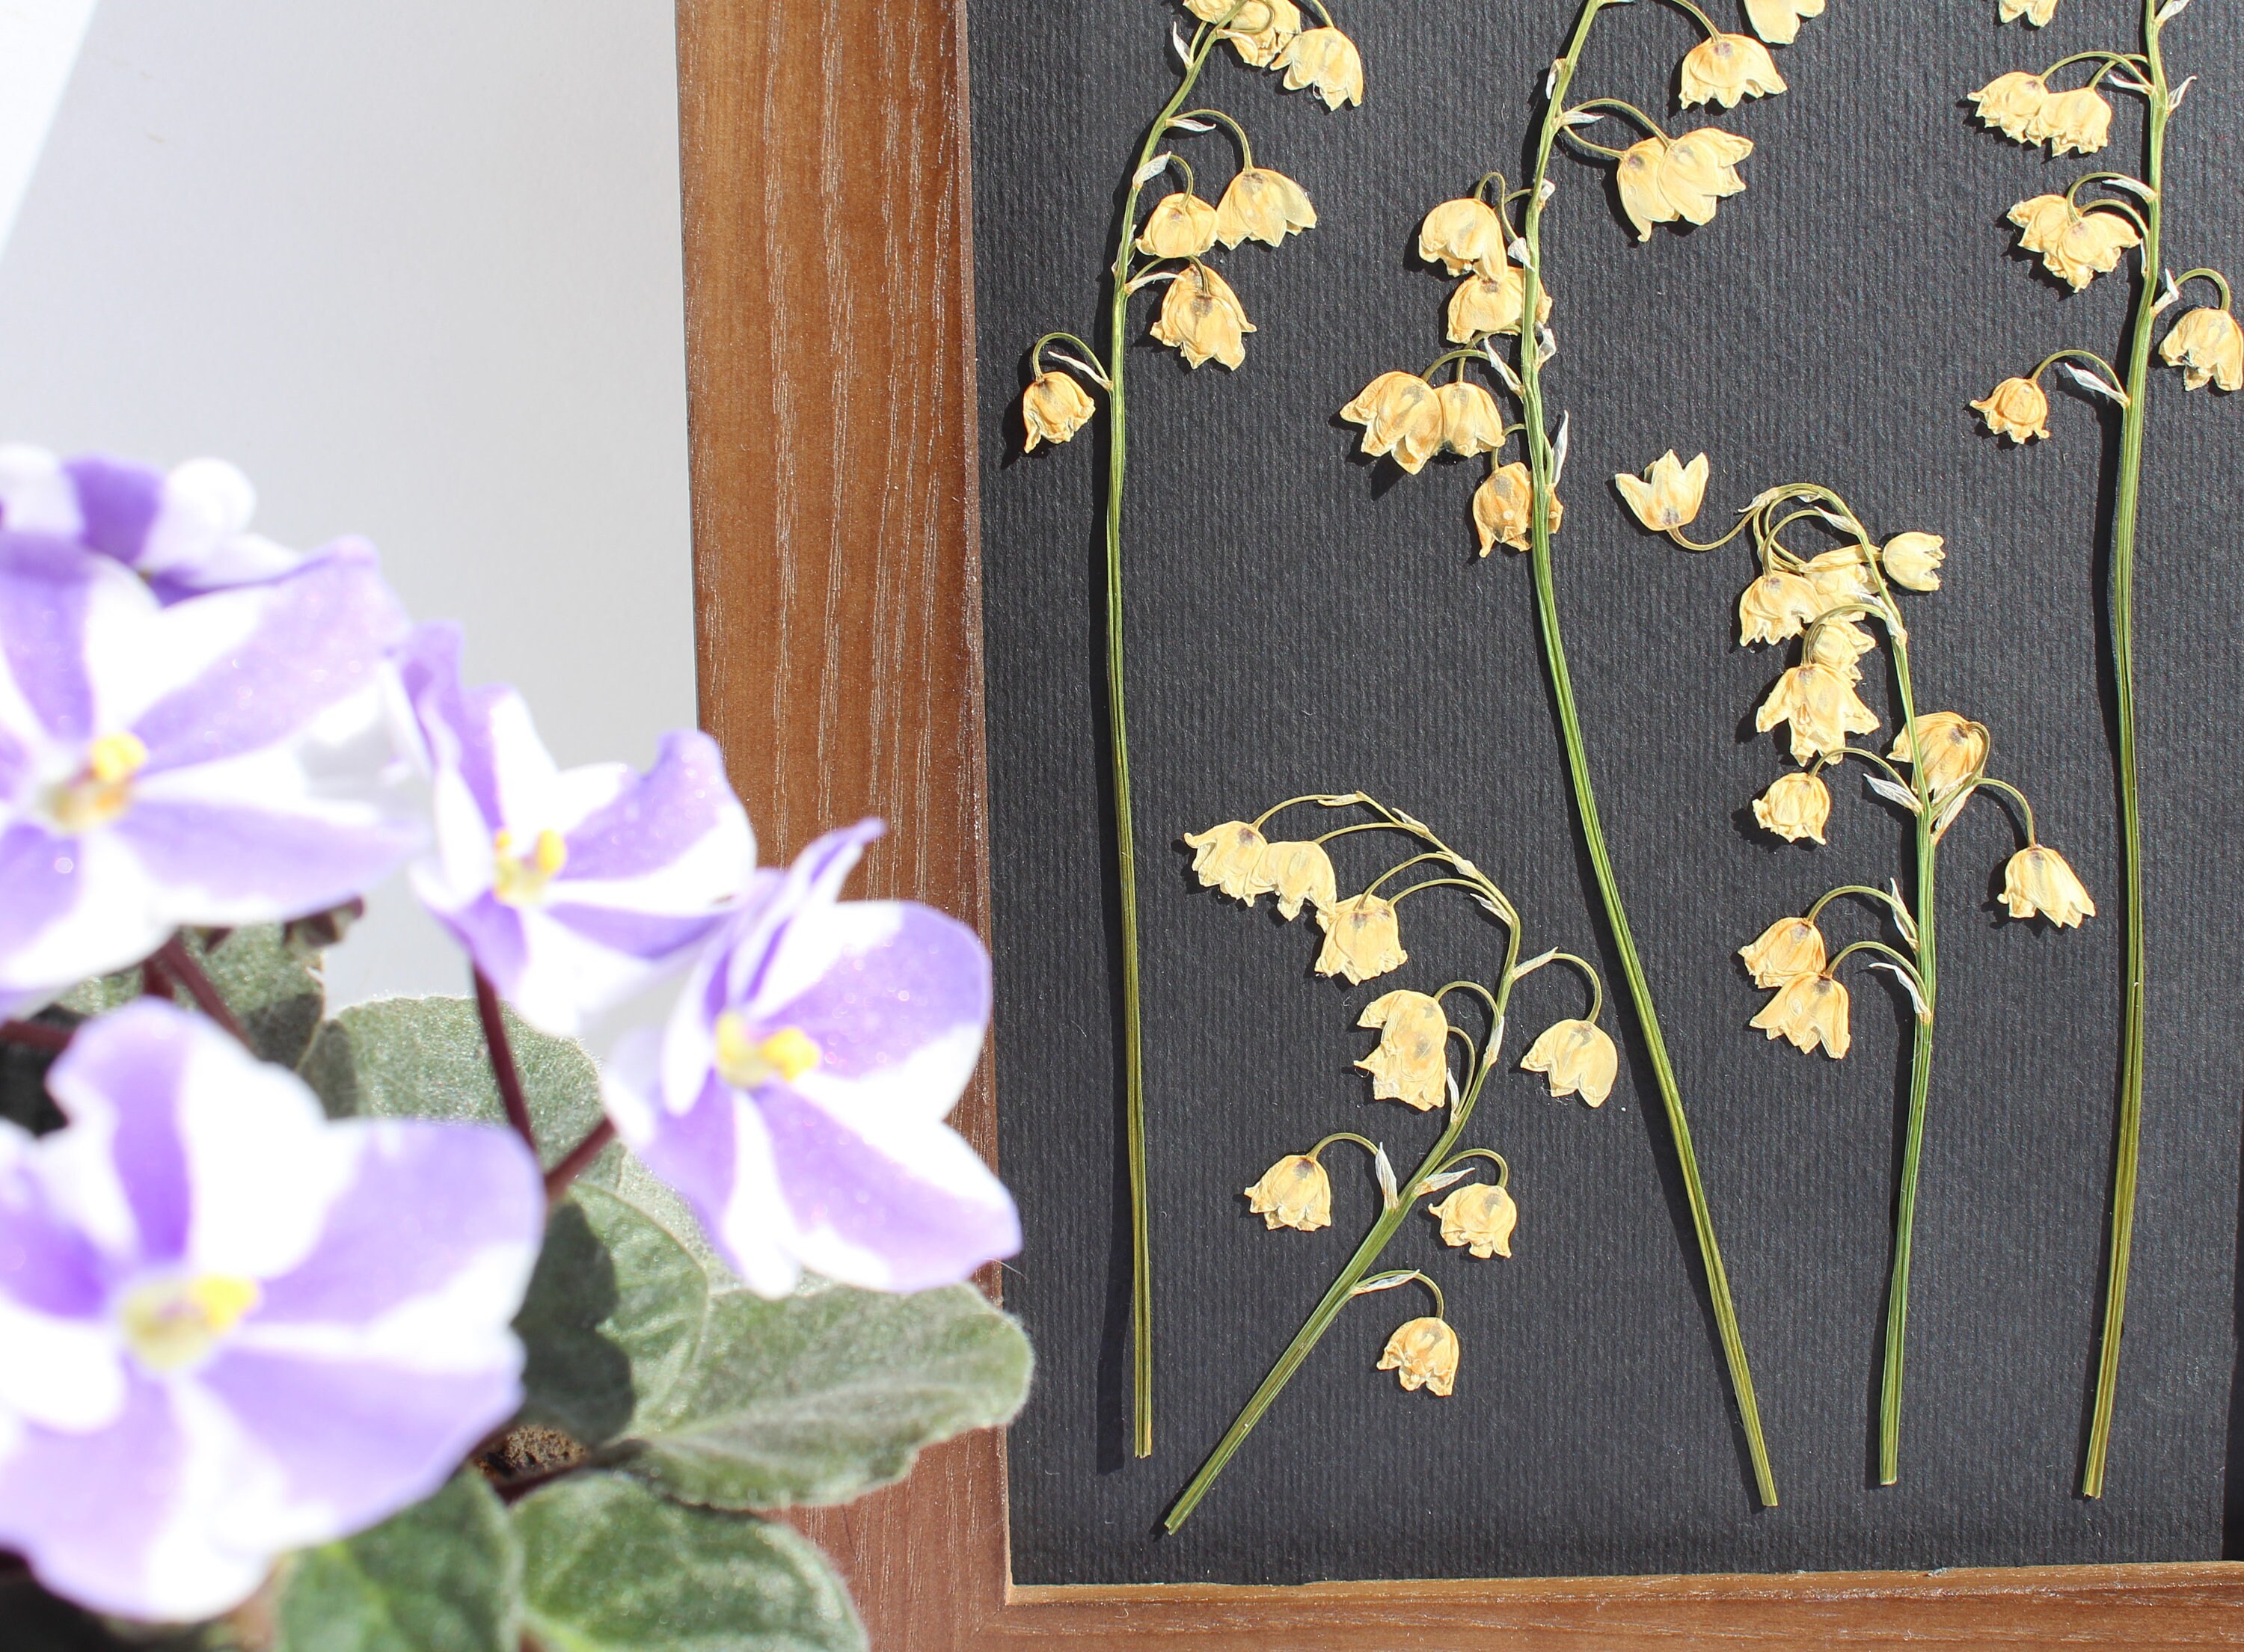 Field of Flowers - Arched Botanical Pressed Flower Art